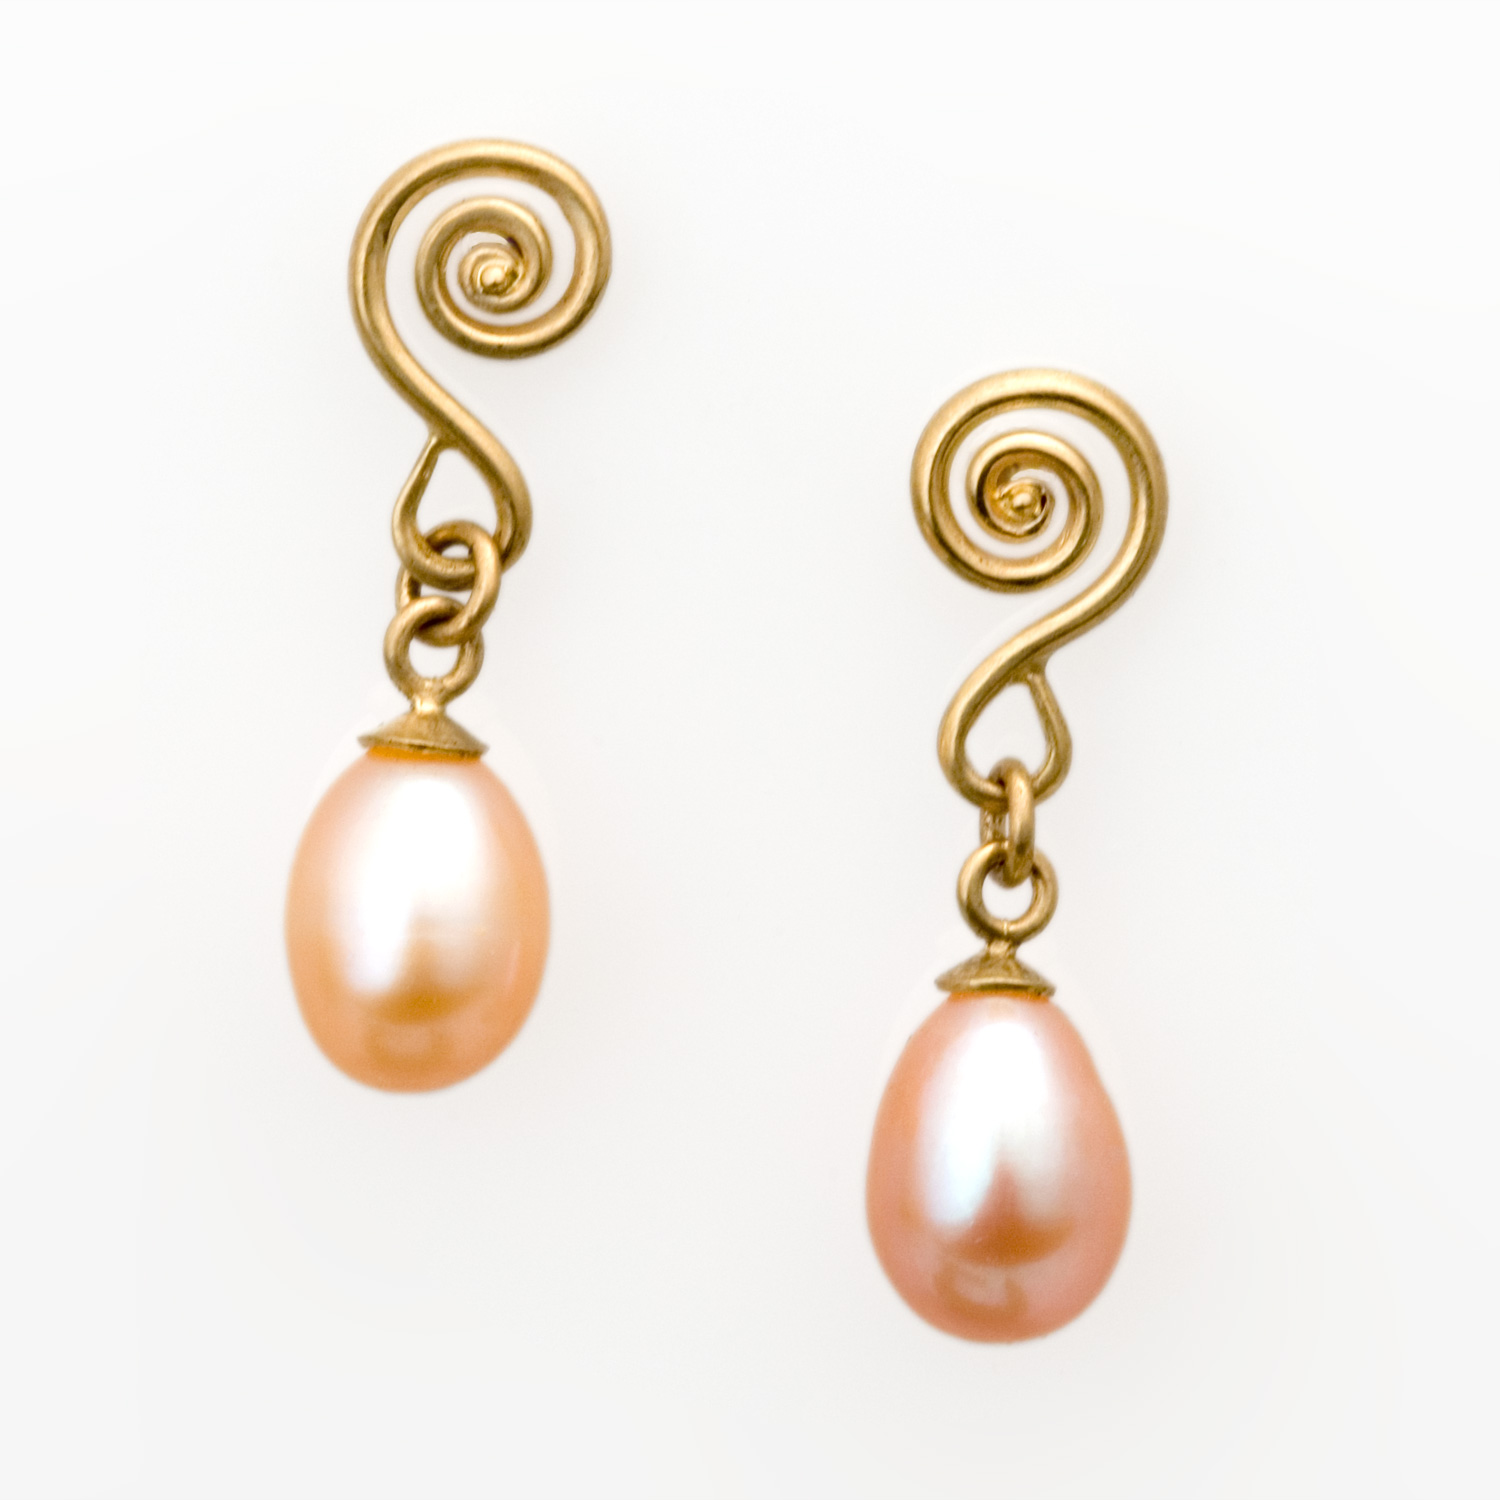 Fiddlehead Drop Earrings in 18k gold with pink pearls by Tamberlaine